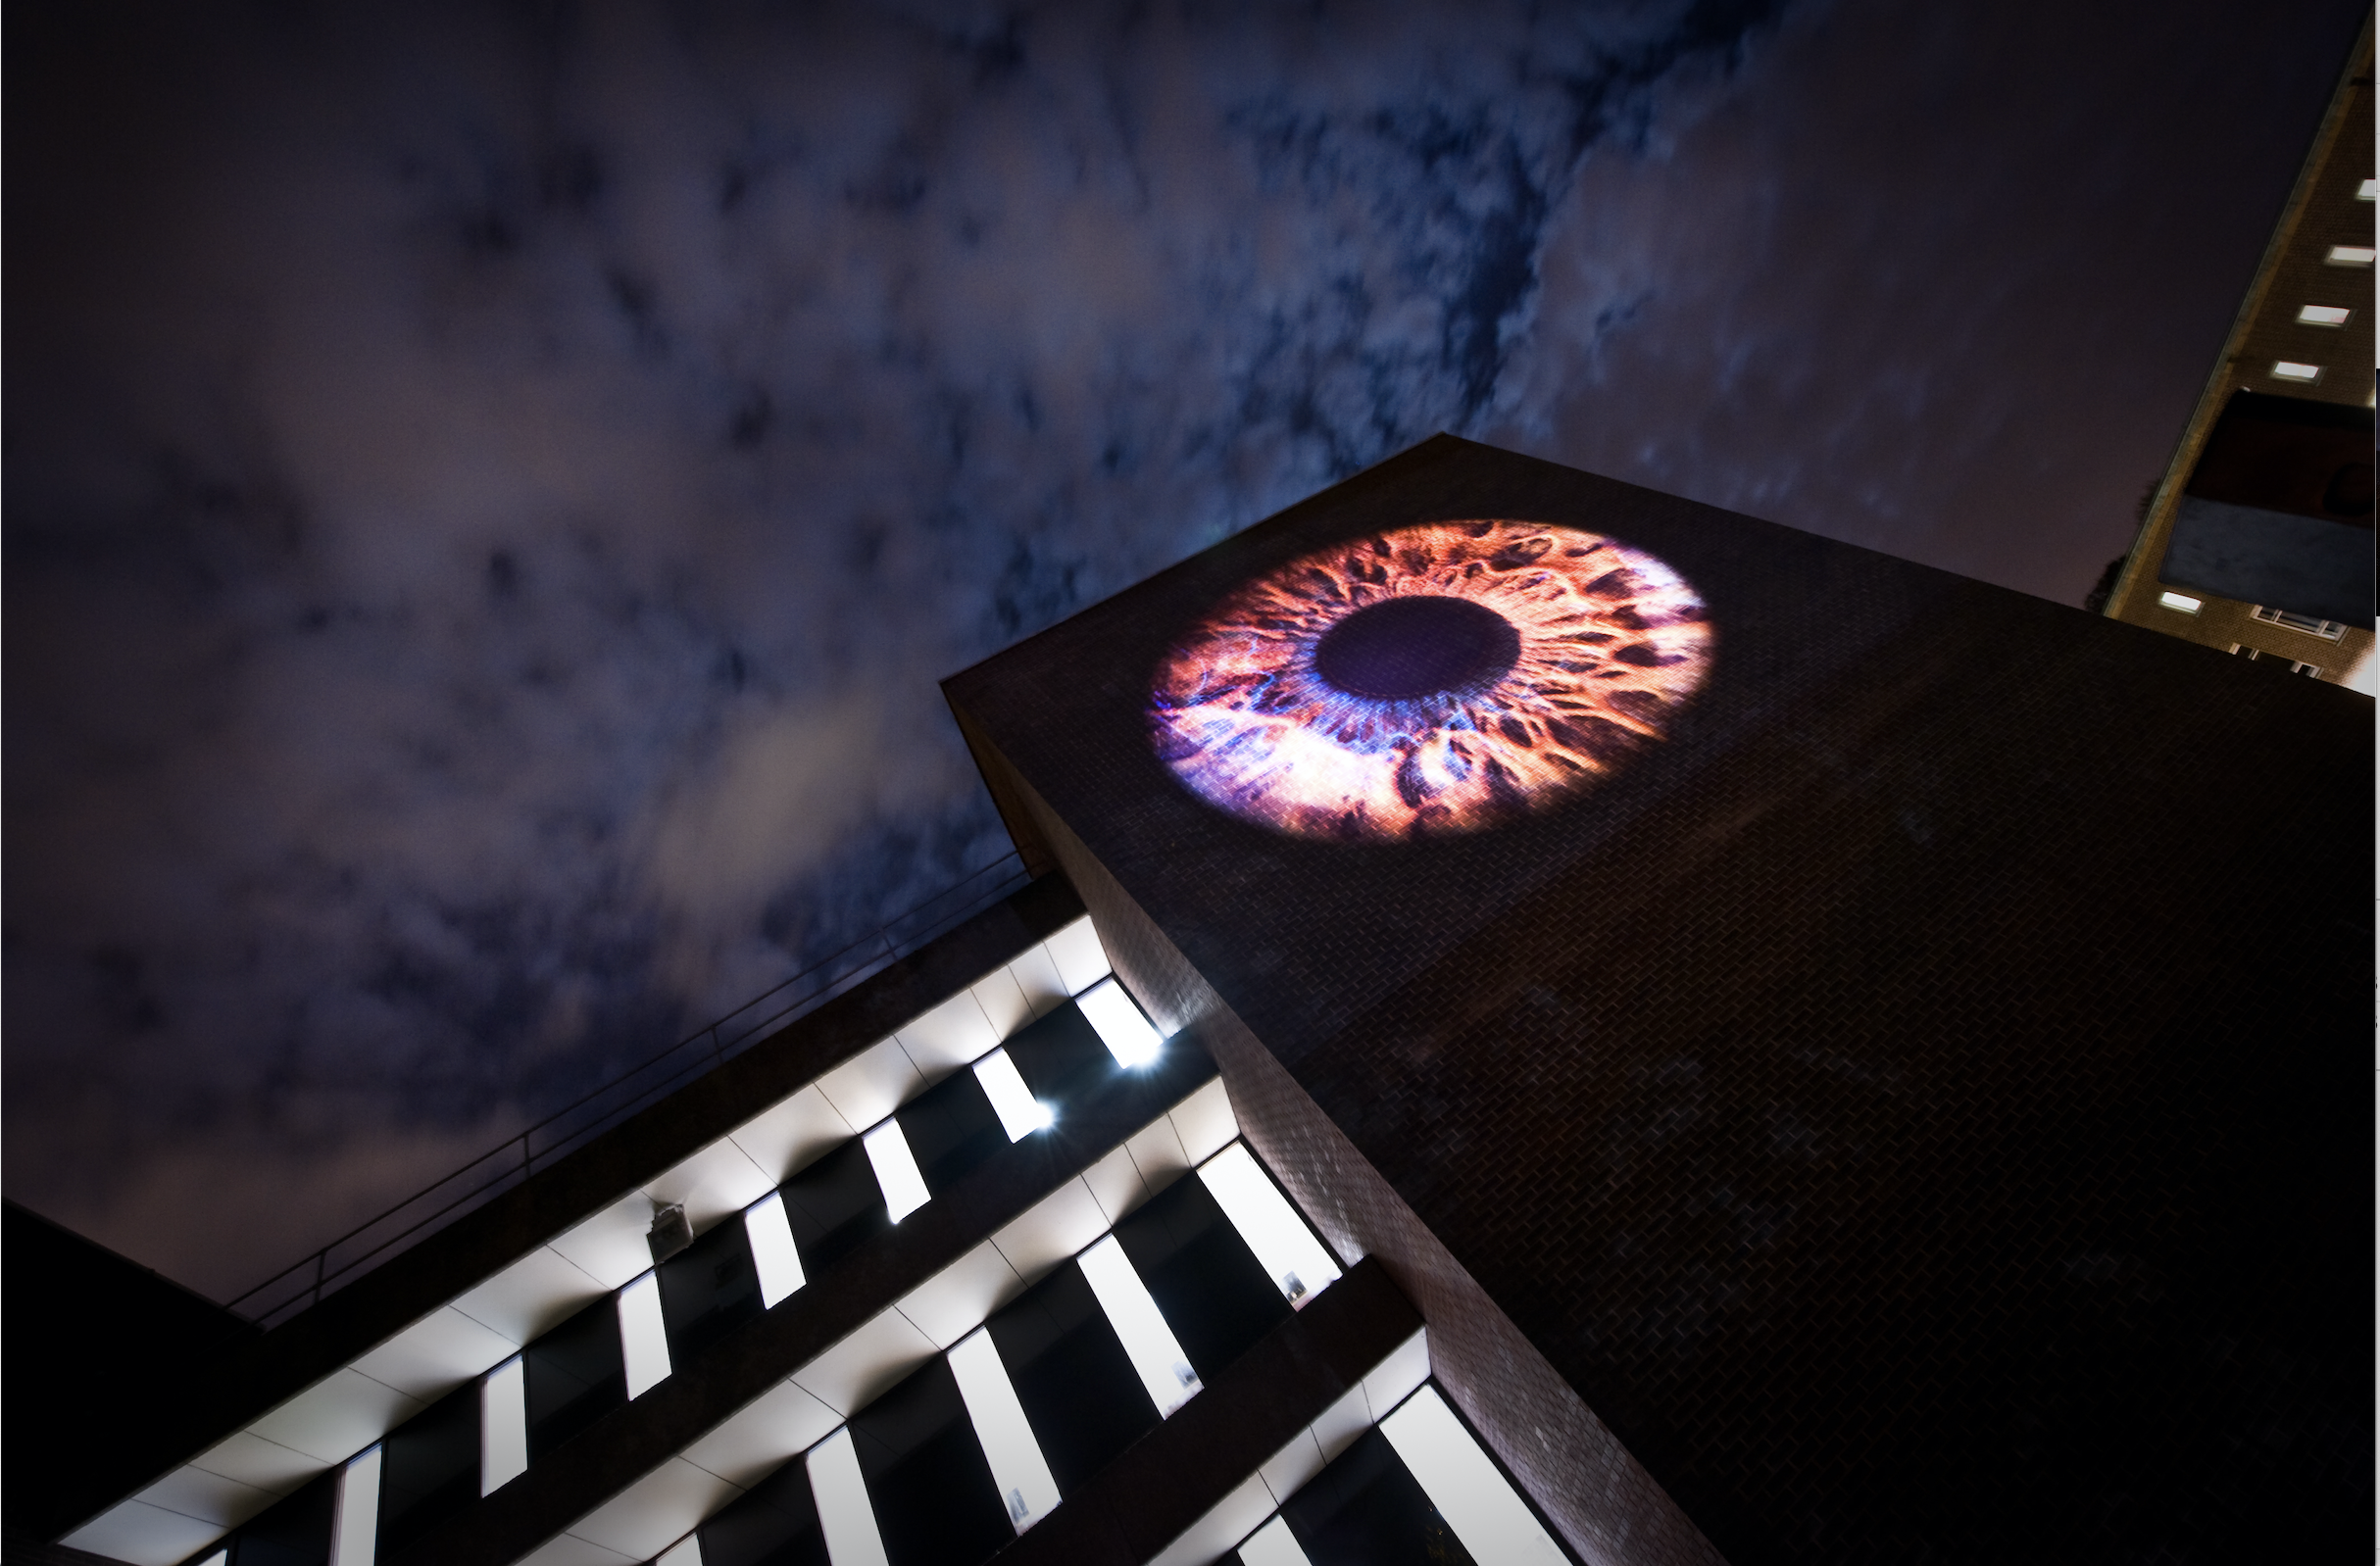 The artwork i being projected onto the side of the Bill Bryson Library as part of Lumiere 2013.